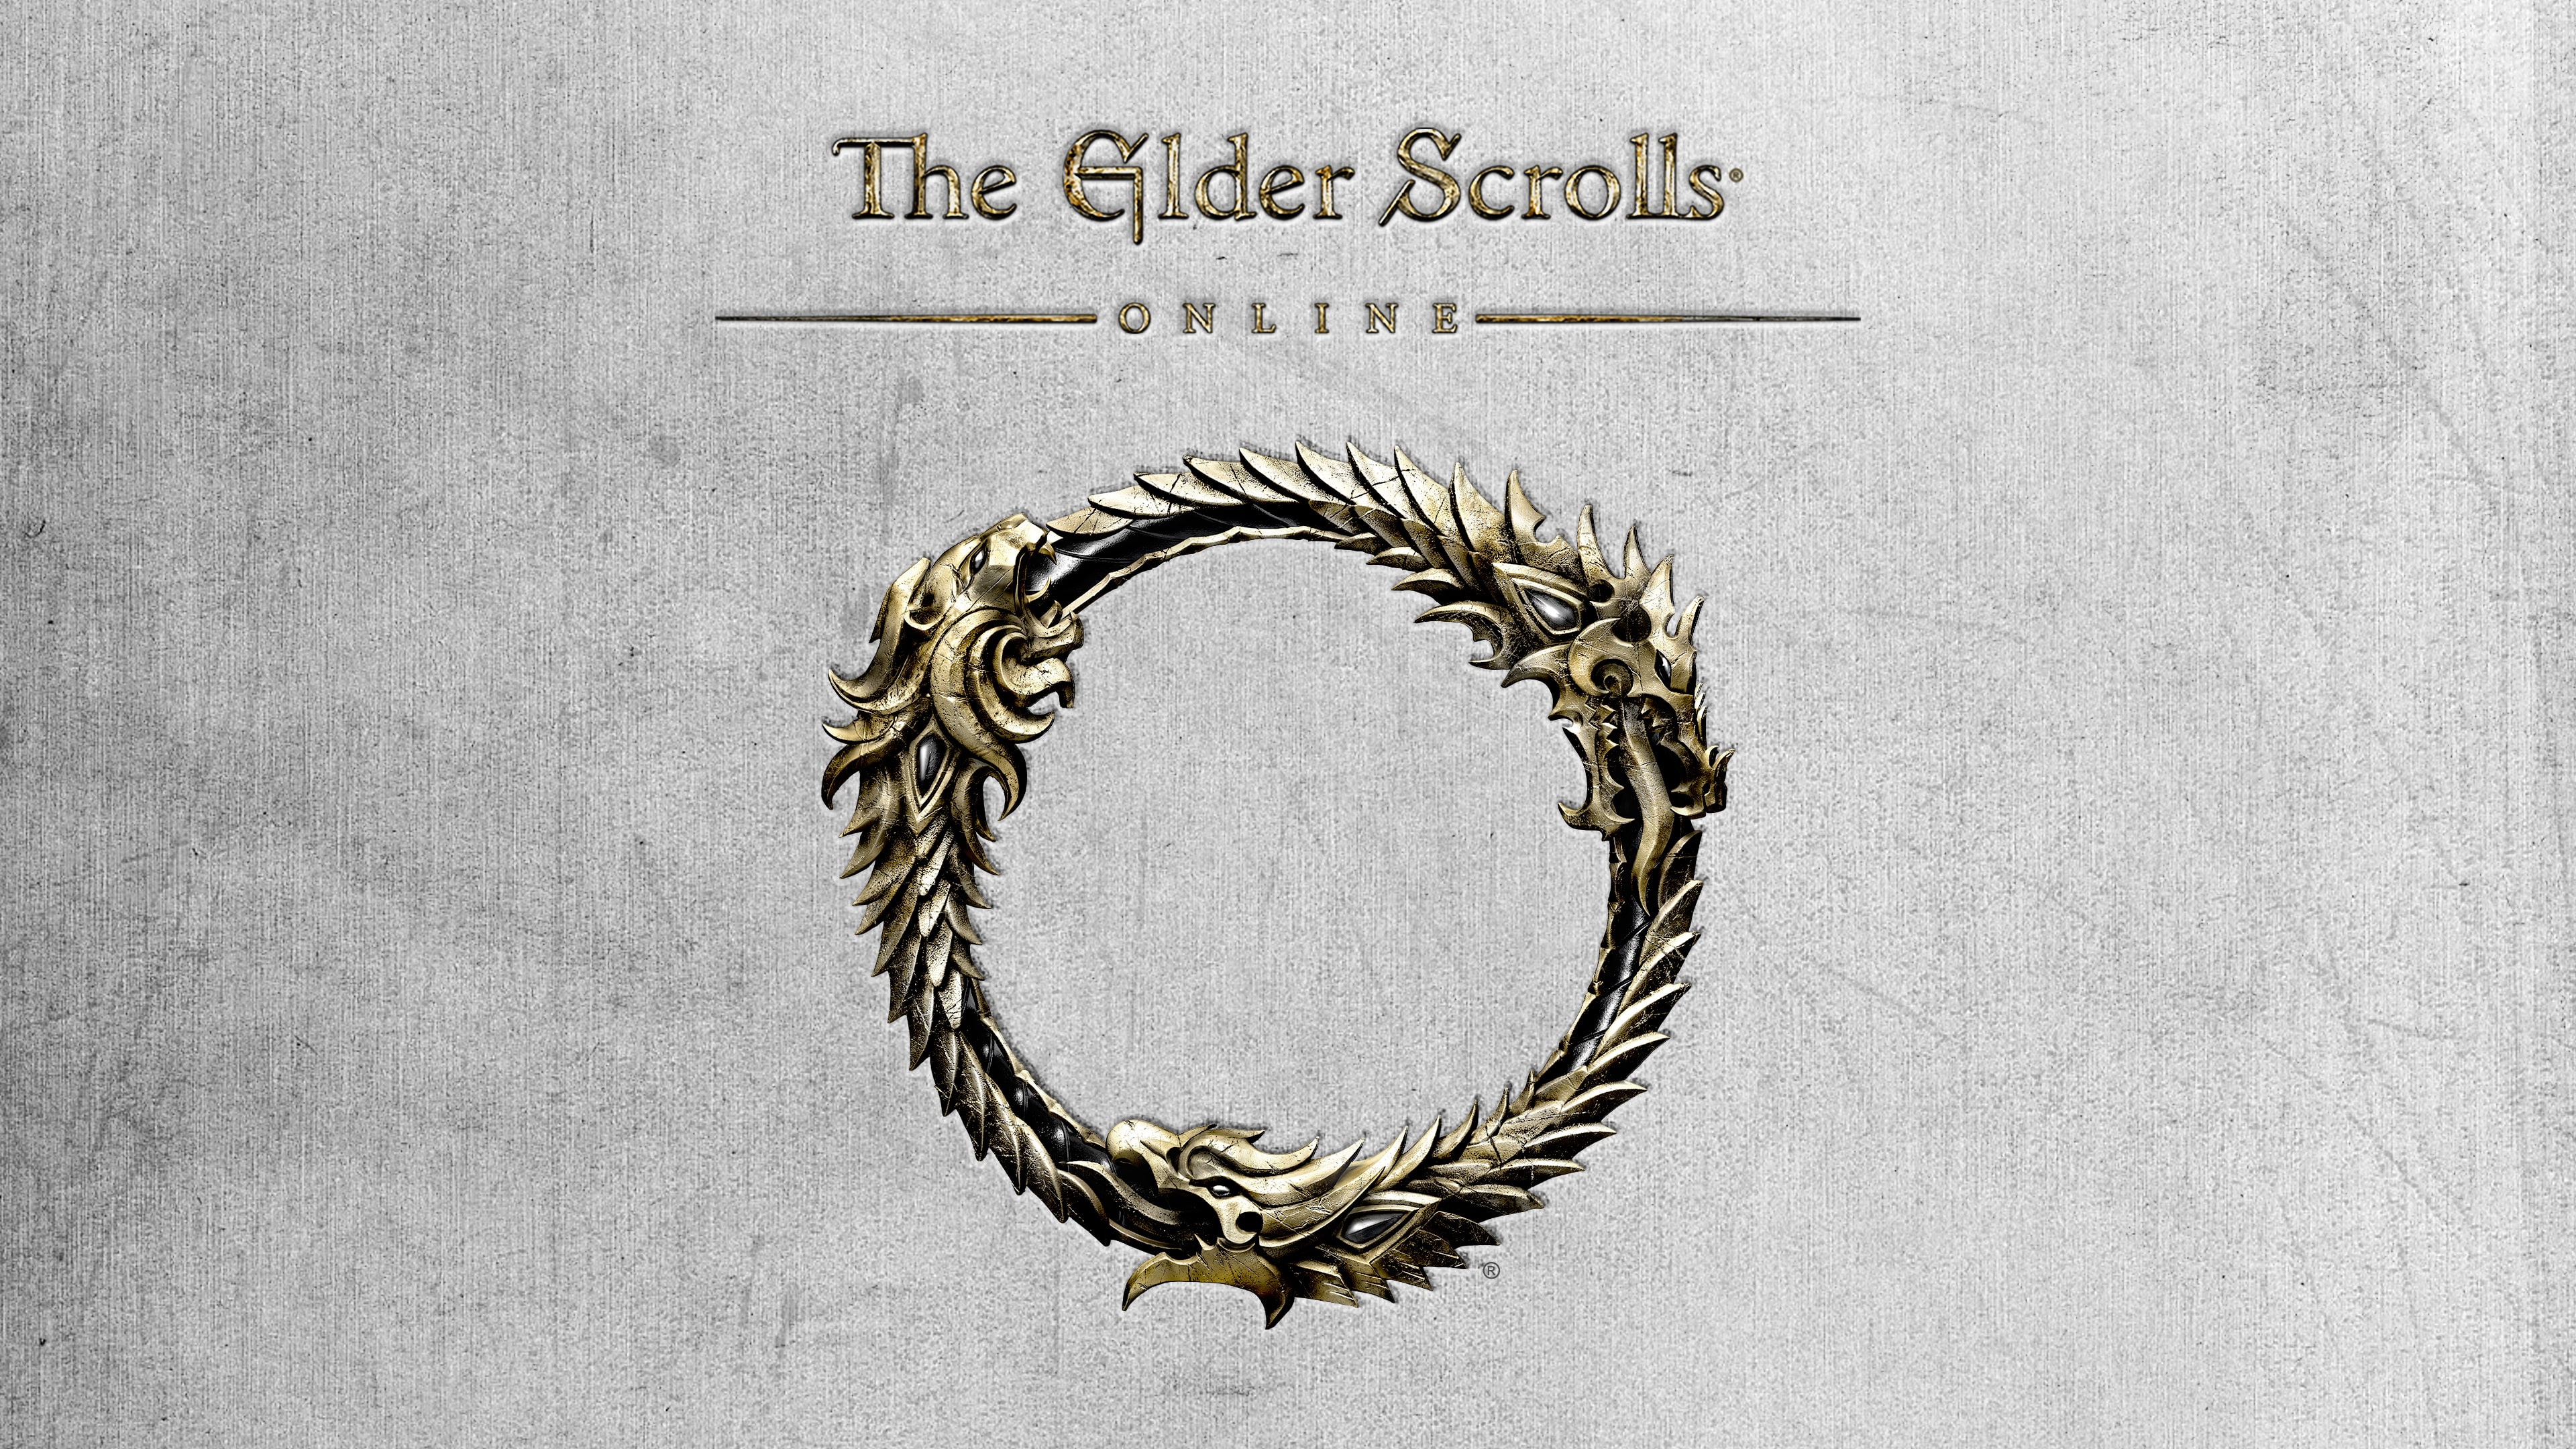 The Elder Scrolls Online - PS5 (Simplified Chinese, English, Japanese)